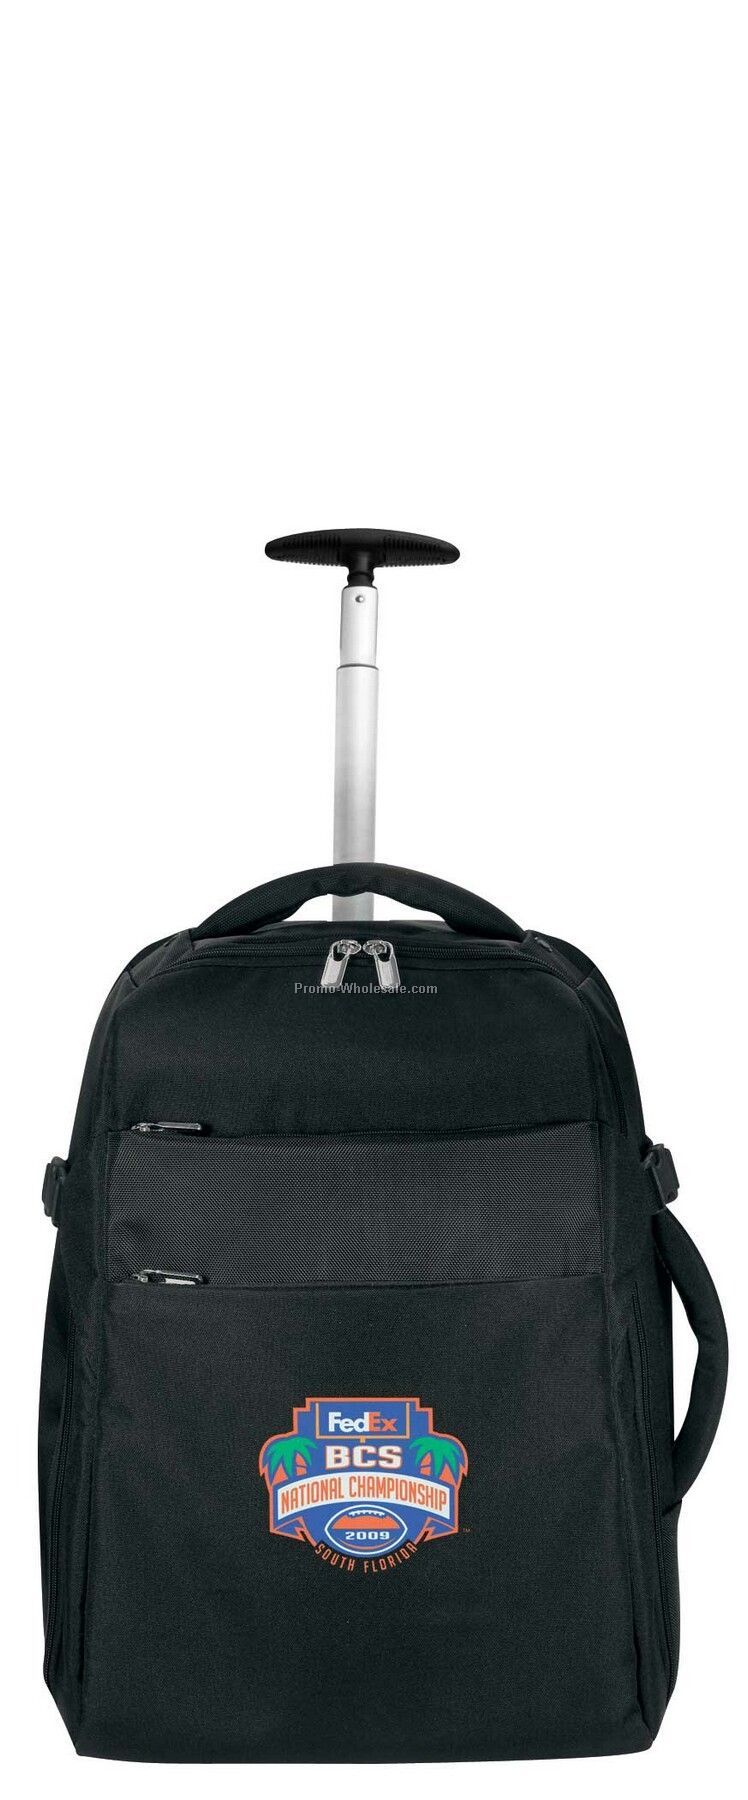 Rolling Computer Backpack